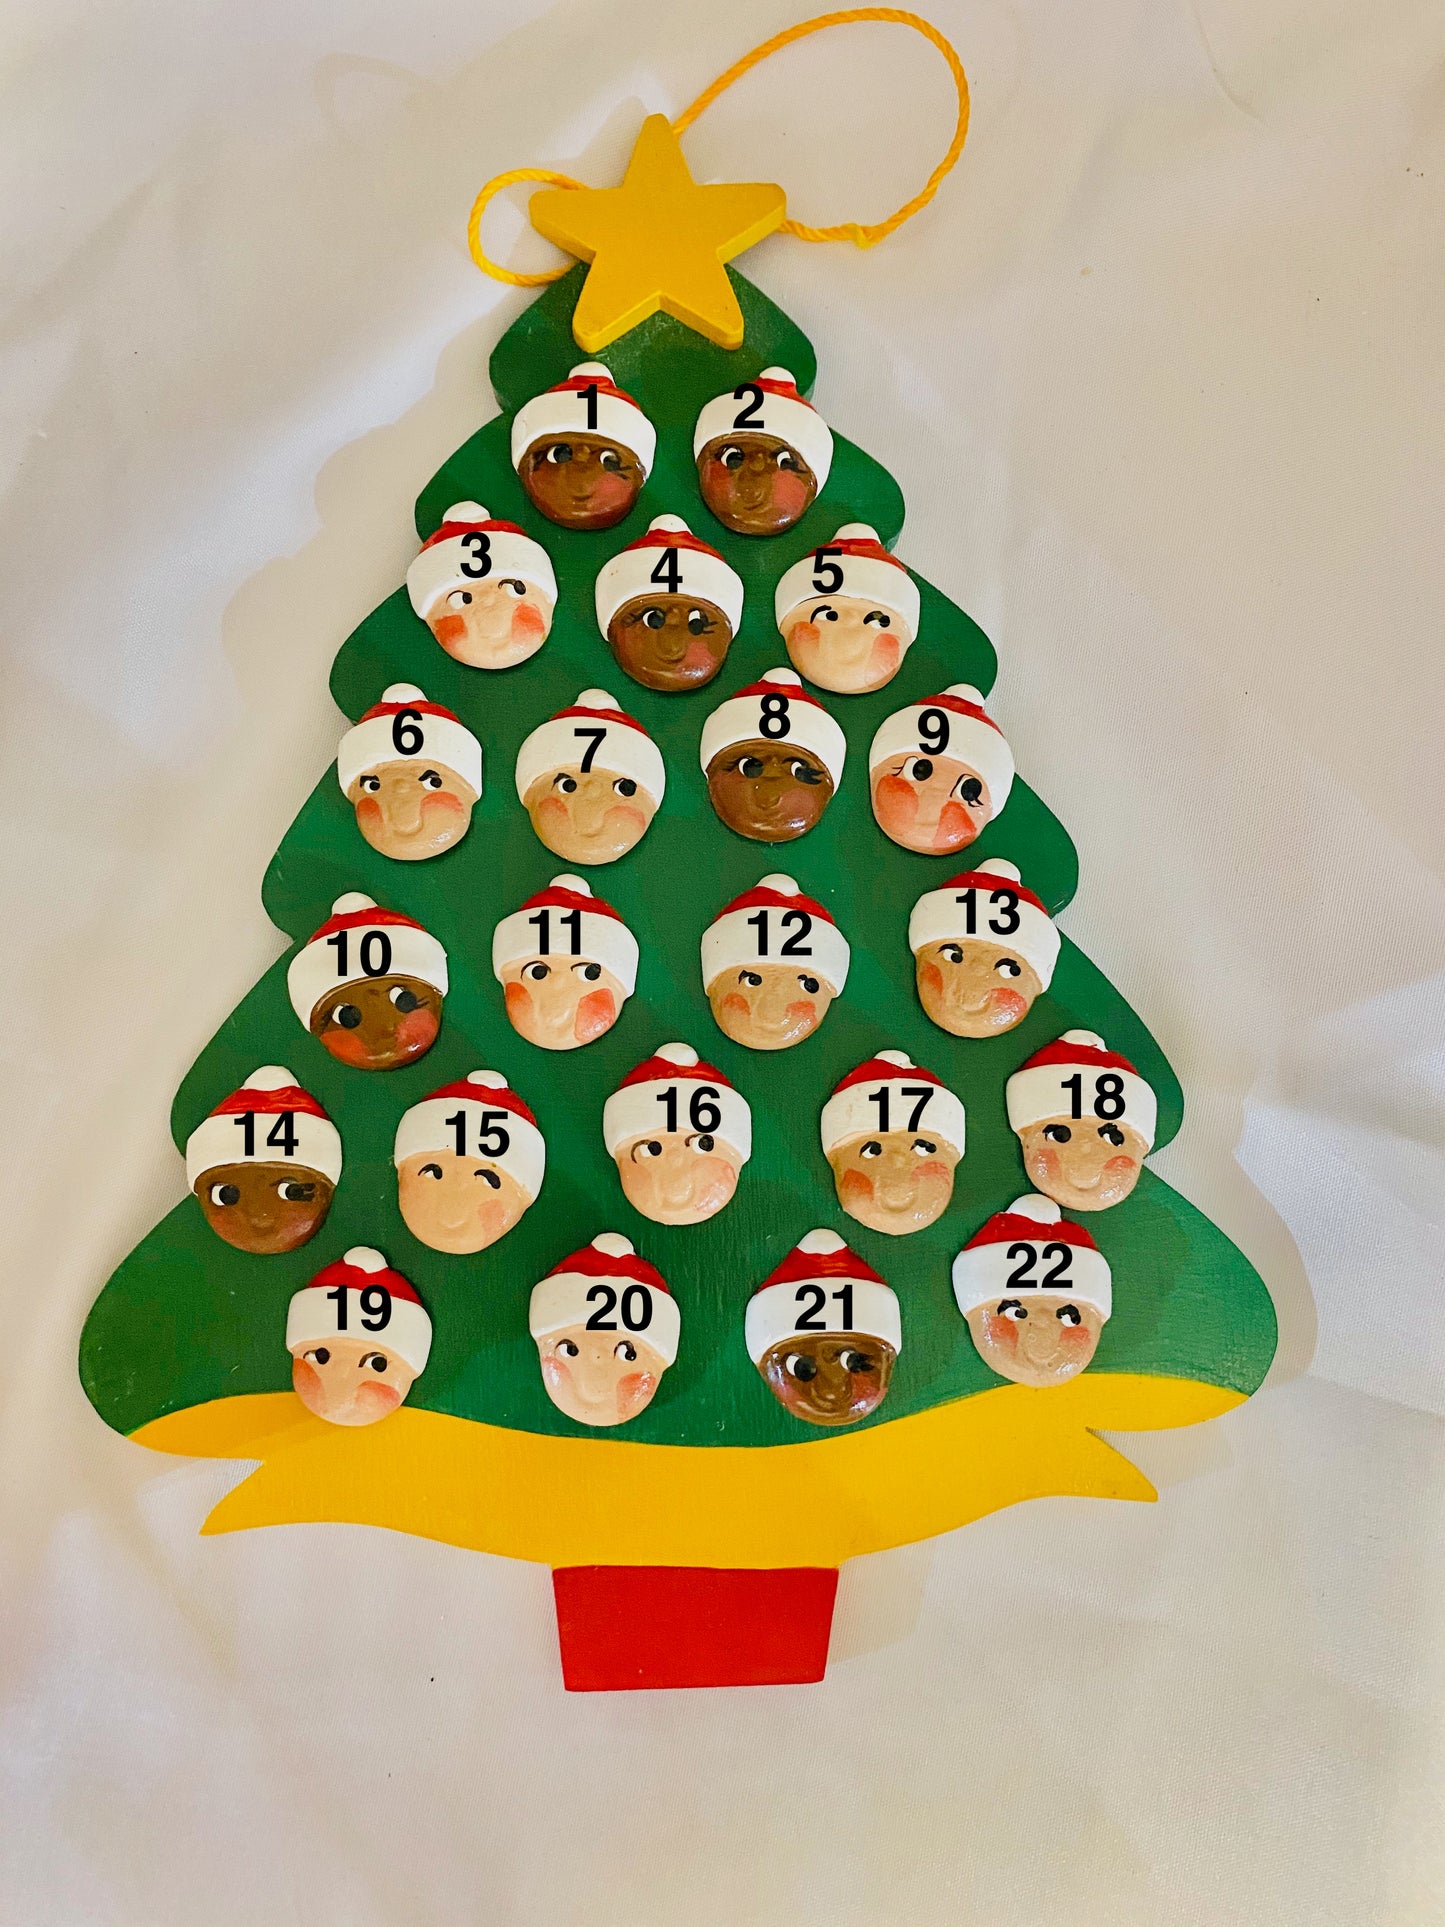 Personalized Ornament  22 Santa Faces on a Christmas Tree 8.5" x 7"